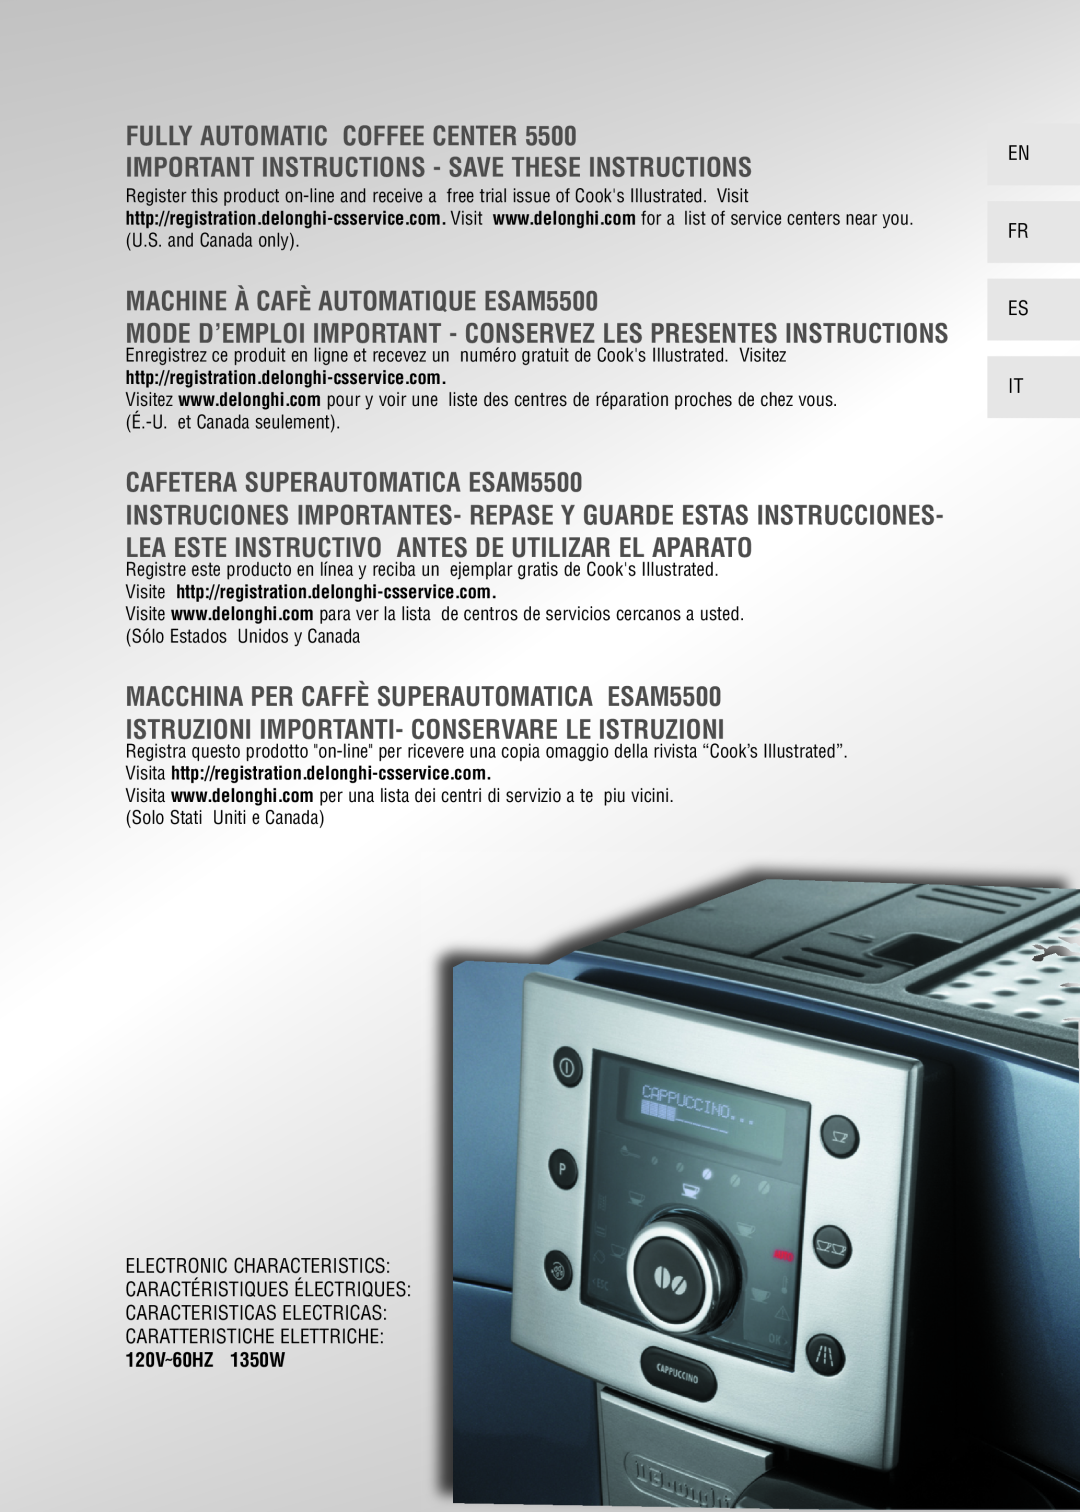 DeLonghi 5500 manual Fully Automatic Coffee Center, Important Instructions - Save These Instructions, 120V˜60HZ 1350W 